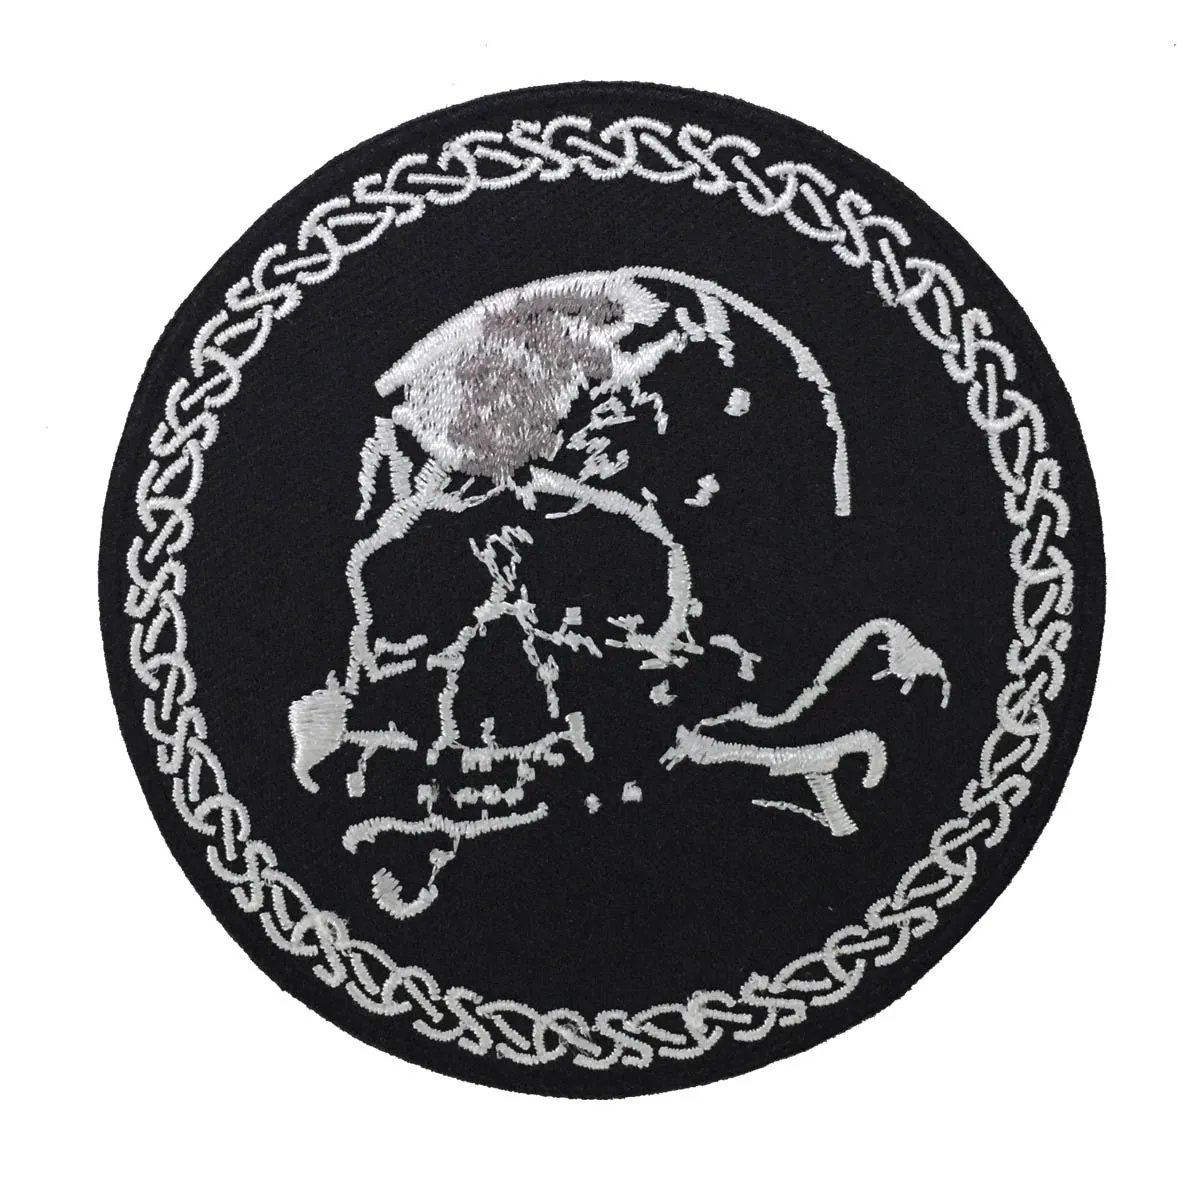 Skull Bones Crossbones Embroidery Patch Motorcycle Biker Club MC Front Jacket Applique Iron Sew On Badge 3.5 INCH Free Shipping